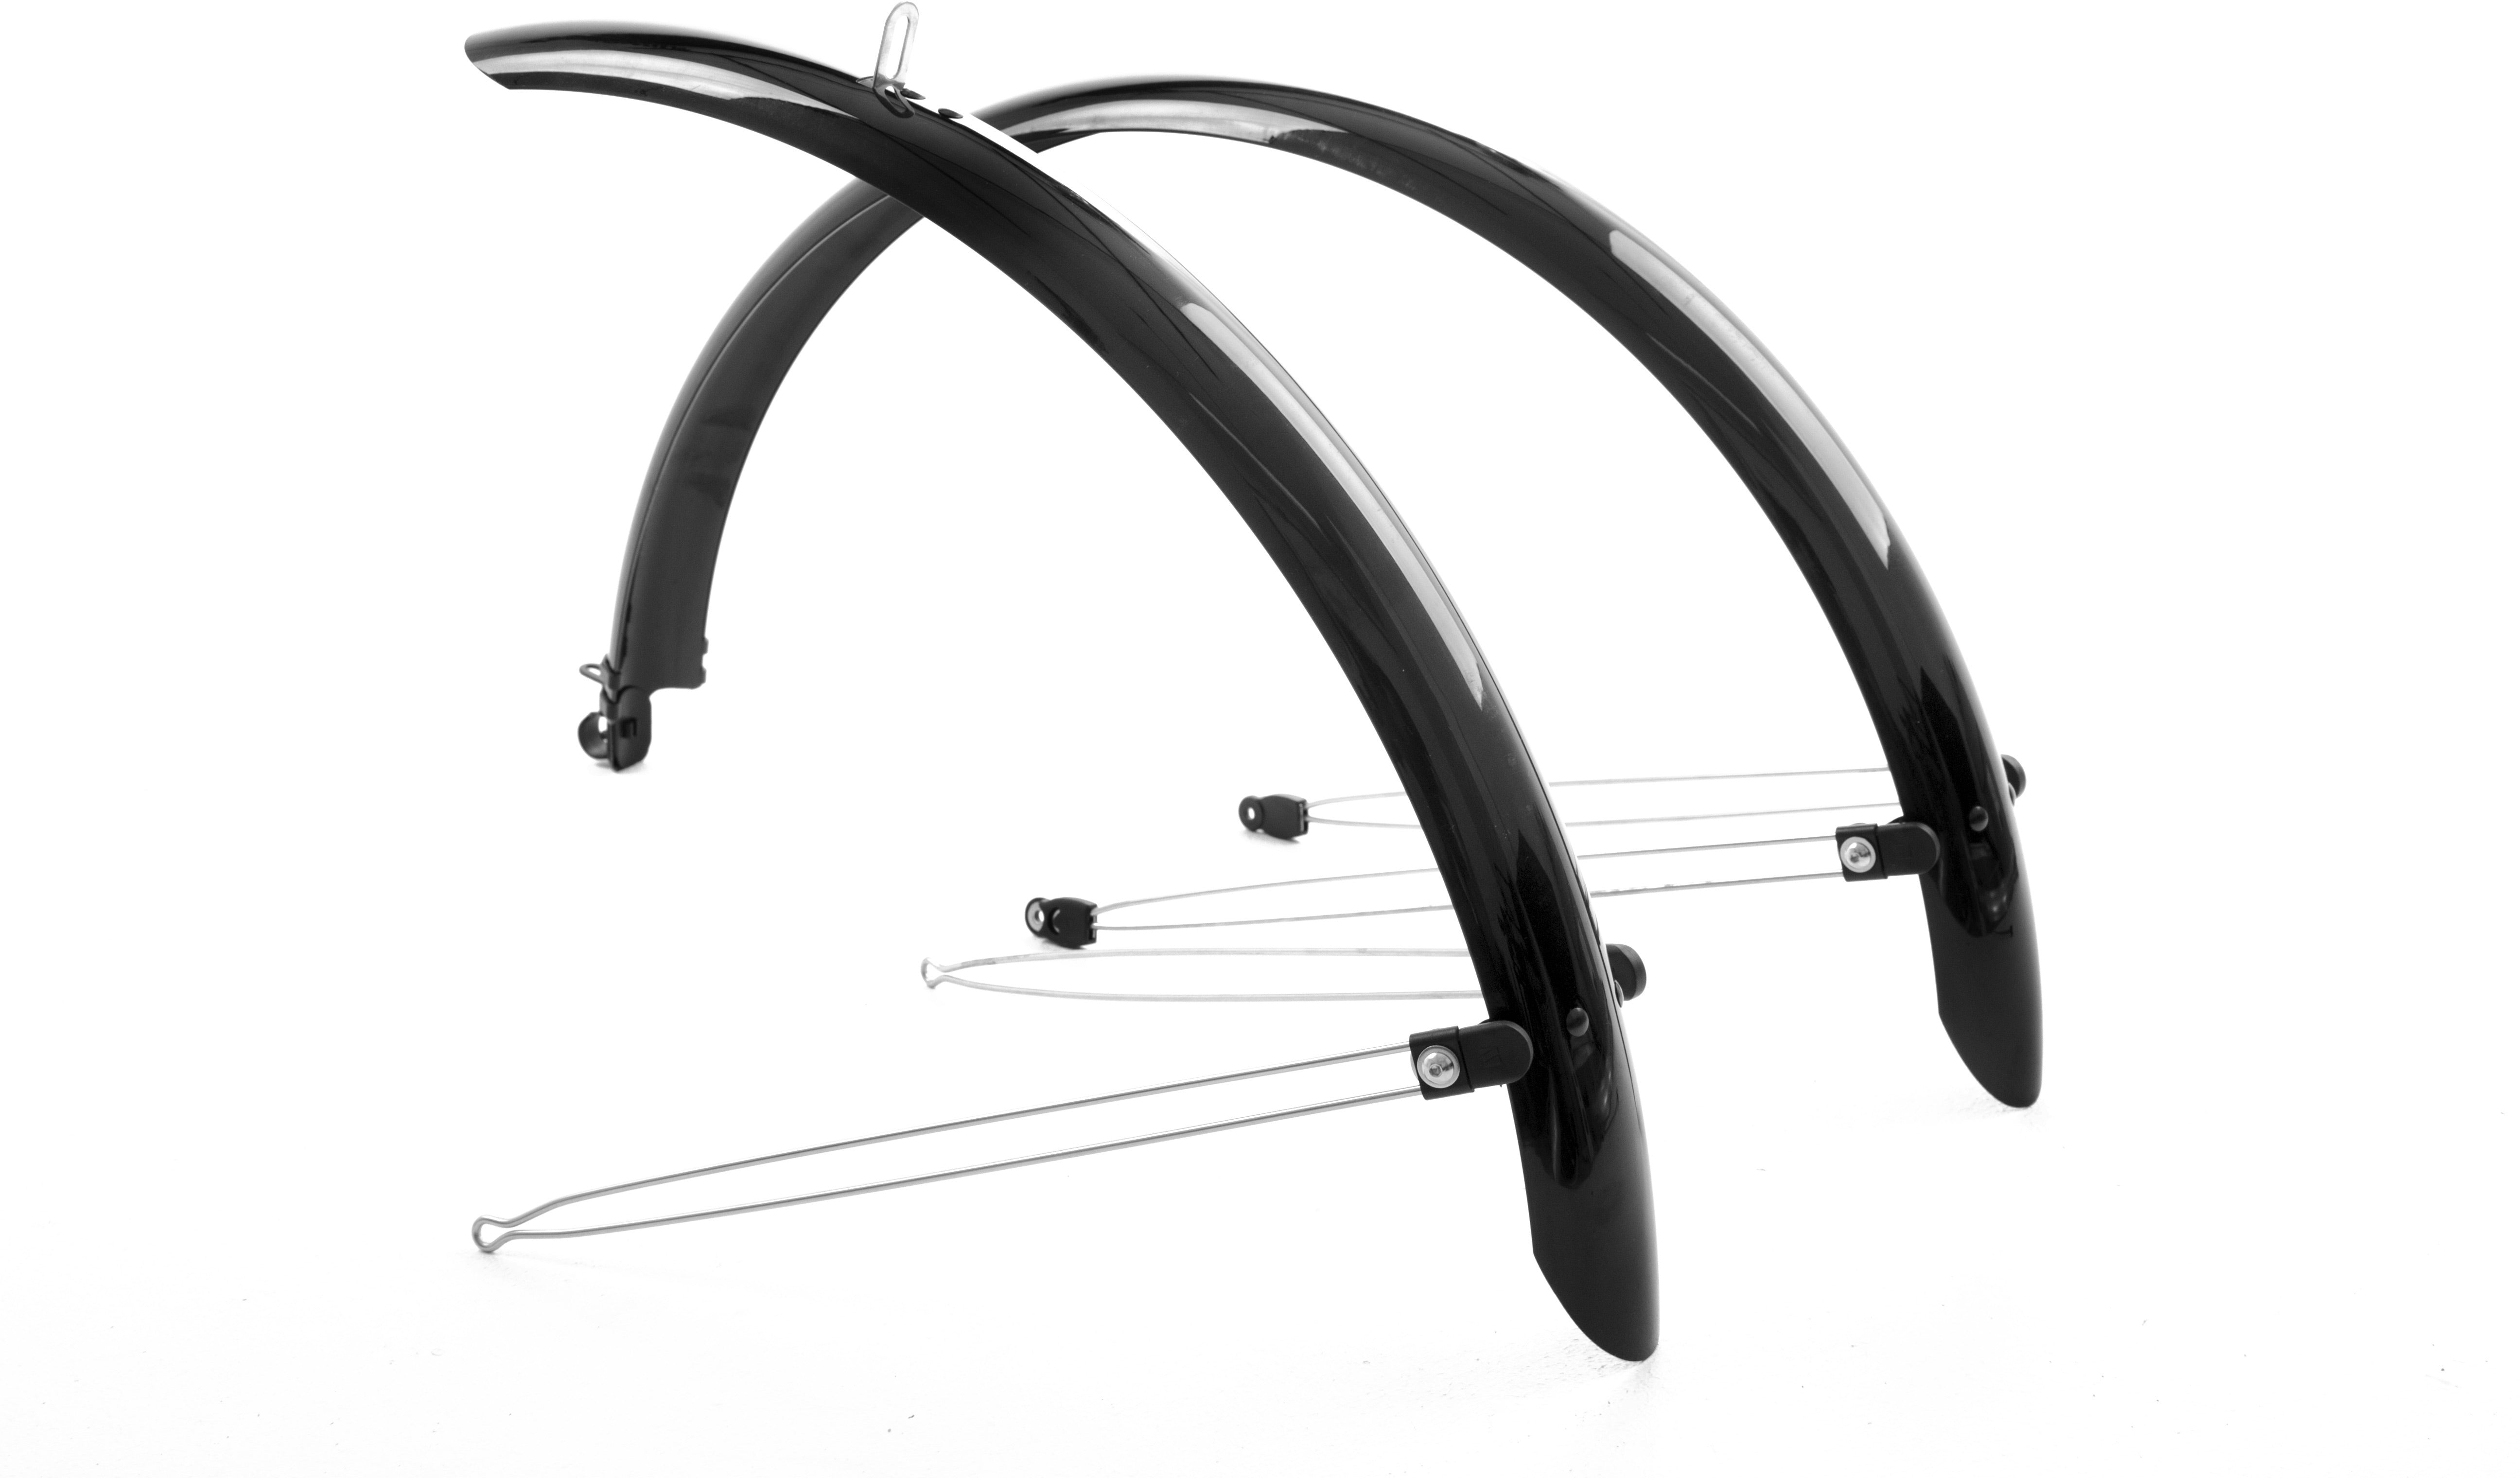 MPART Commute Full Length Bicycle Mudguards | 700 x 46mm | Black-Bicycle Fenders-MPART-Chain Driven Cycles-Bike Shop-Ireland